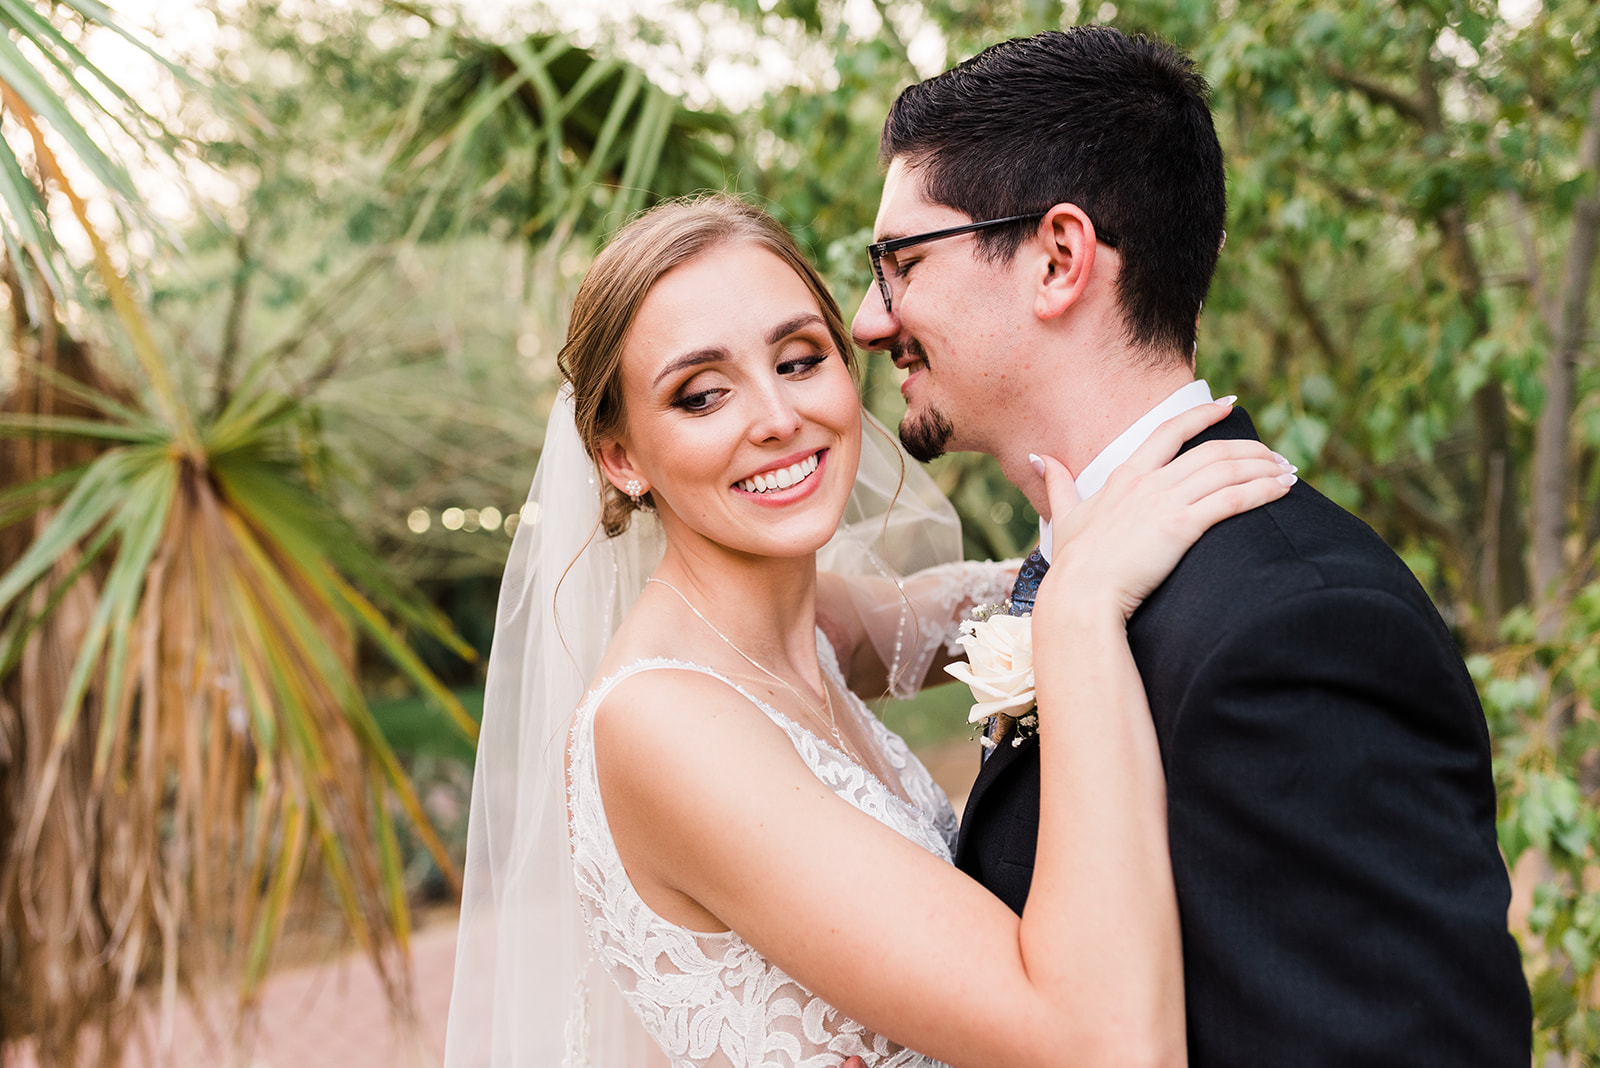 Newlyweds dance in a desert garden while wearing a white lace wedding dress and long veil at Antigua Garden